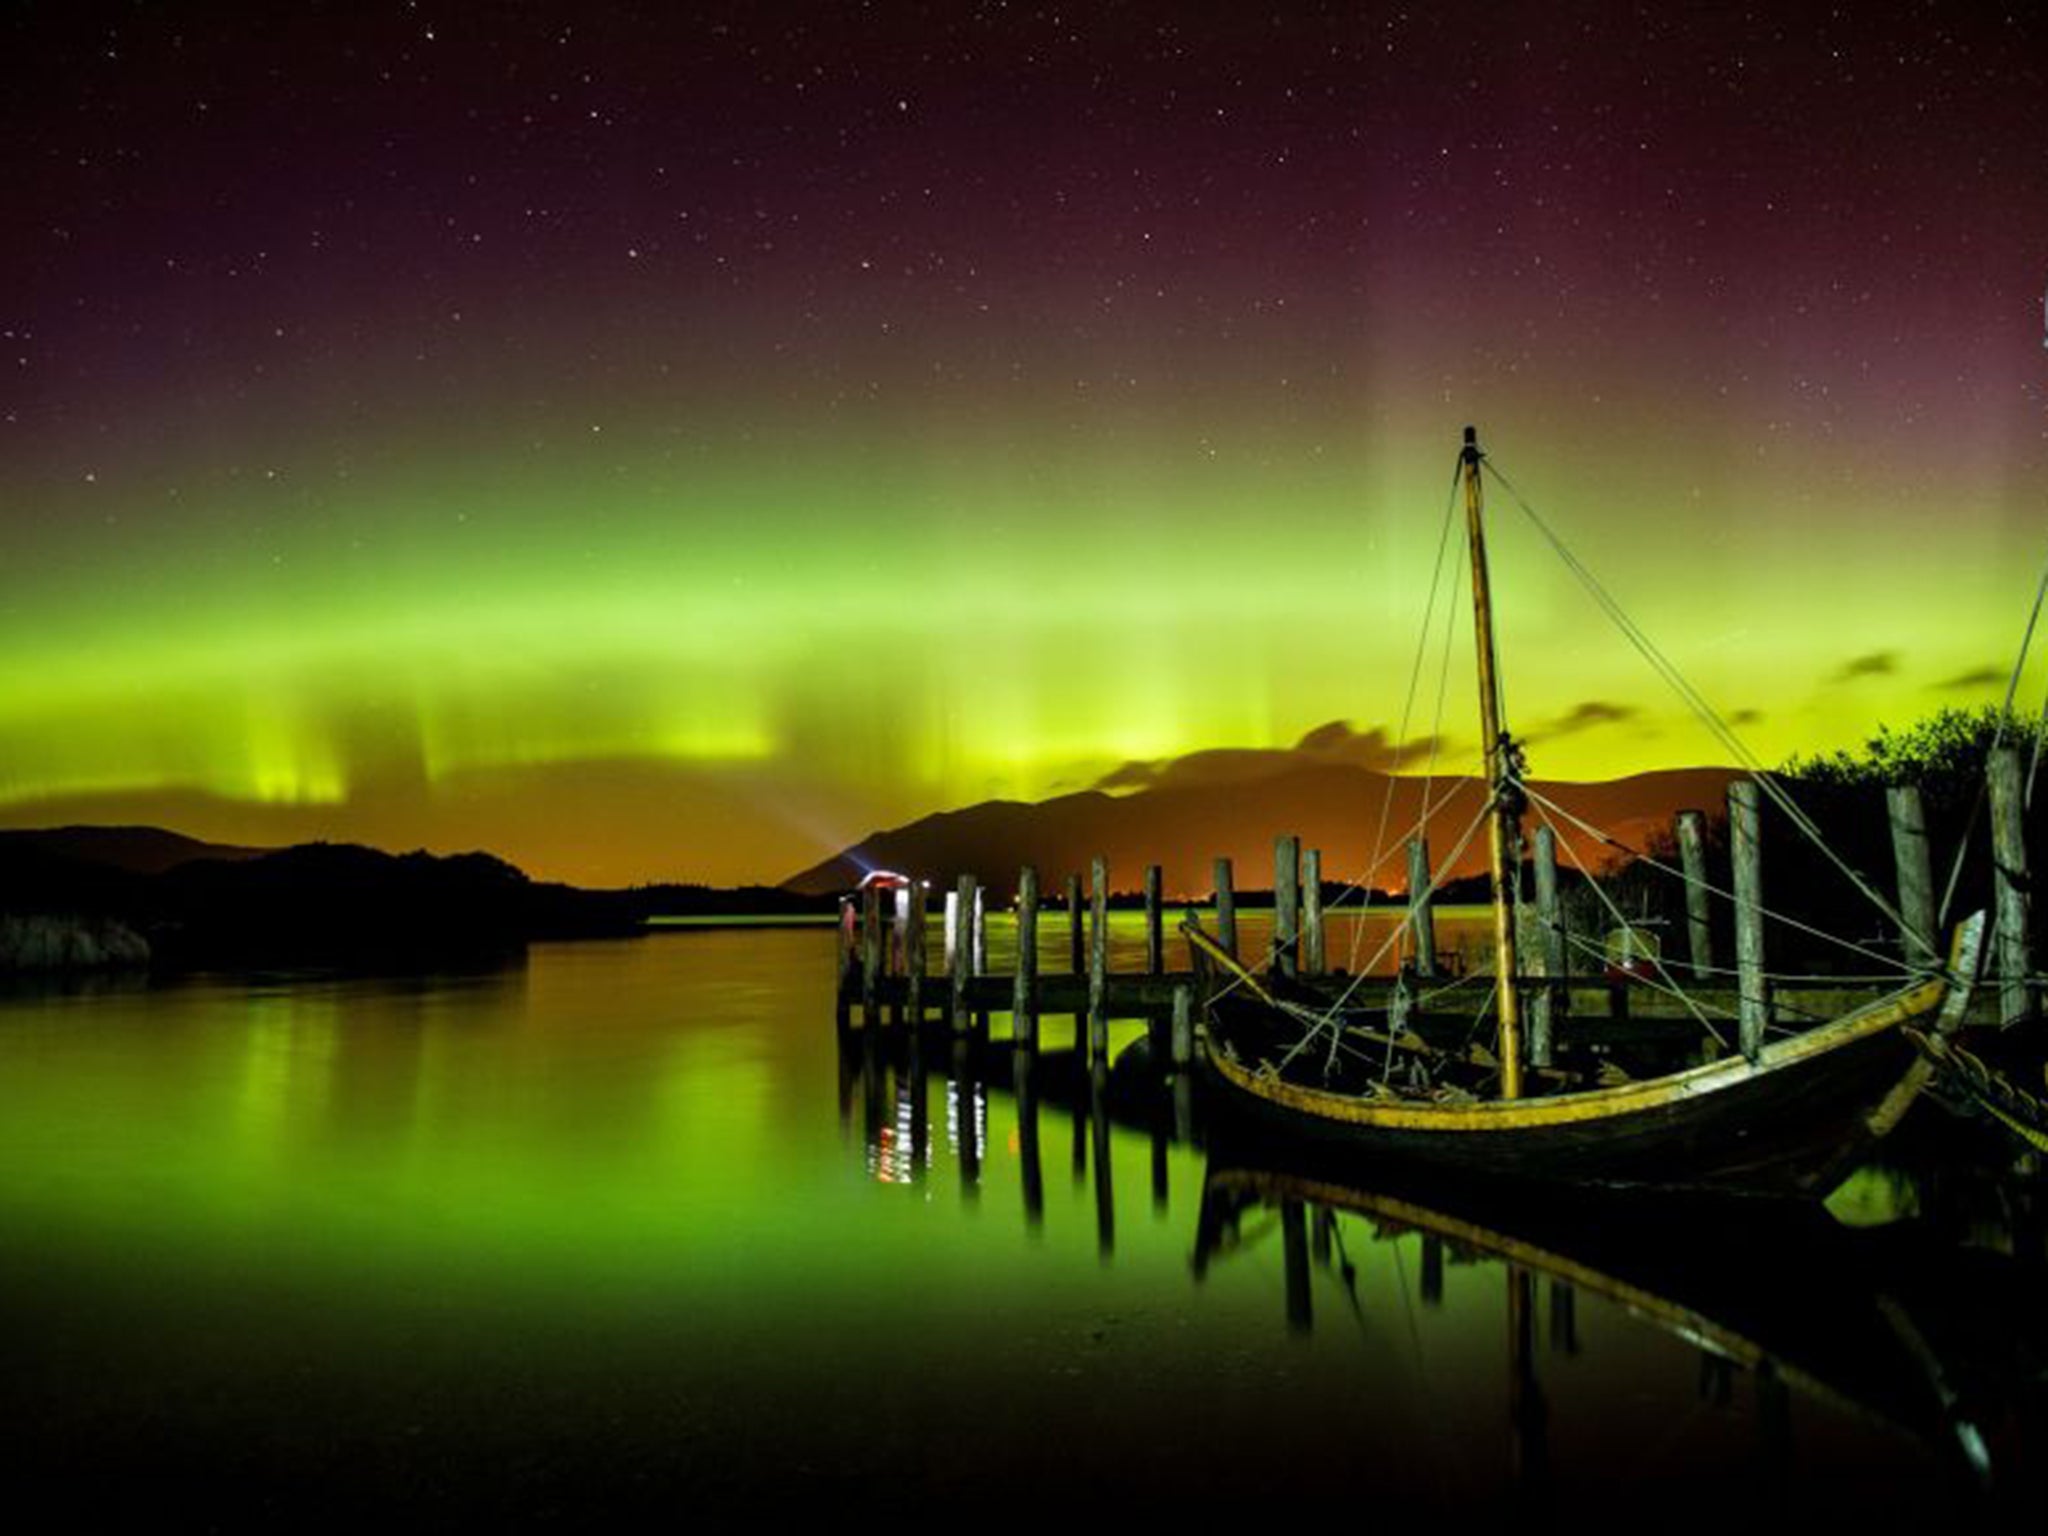 The Northern Lights, or Aurora Borealis, shine over Derwentwater, near Keswick, in the Lake District on Wednesday night